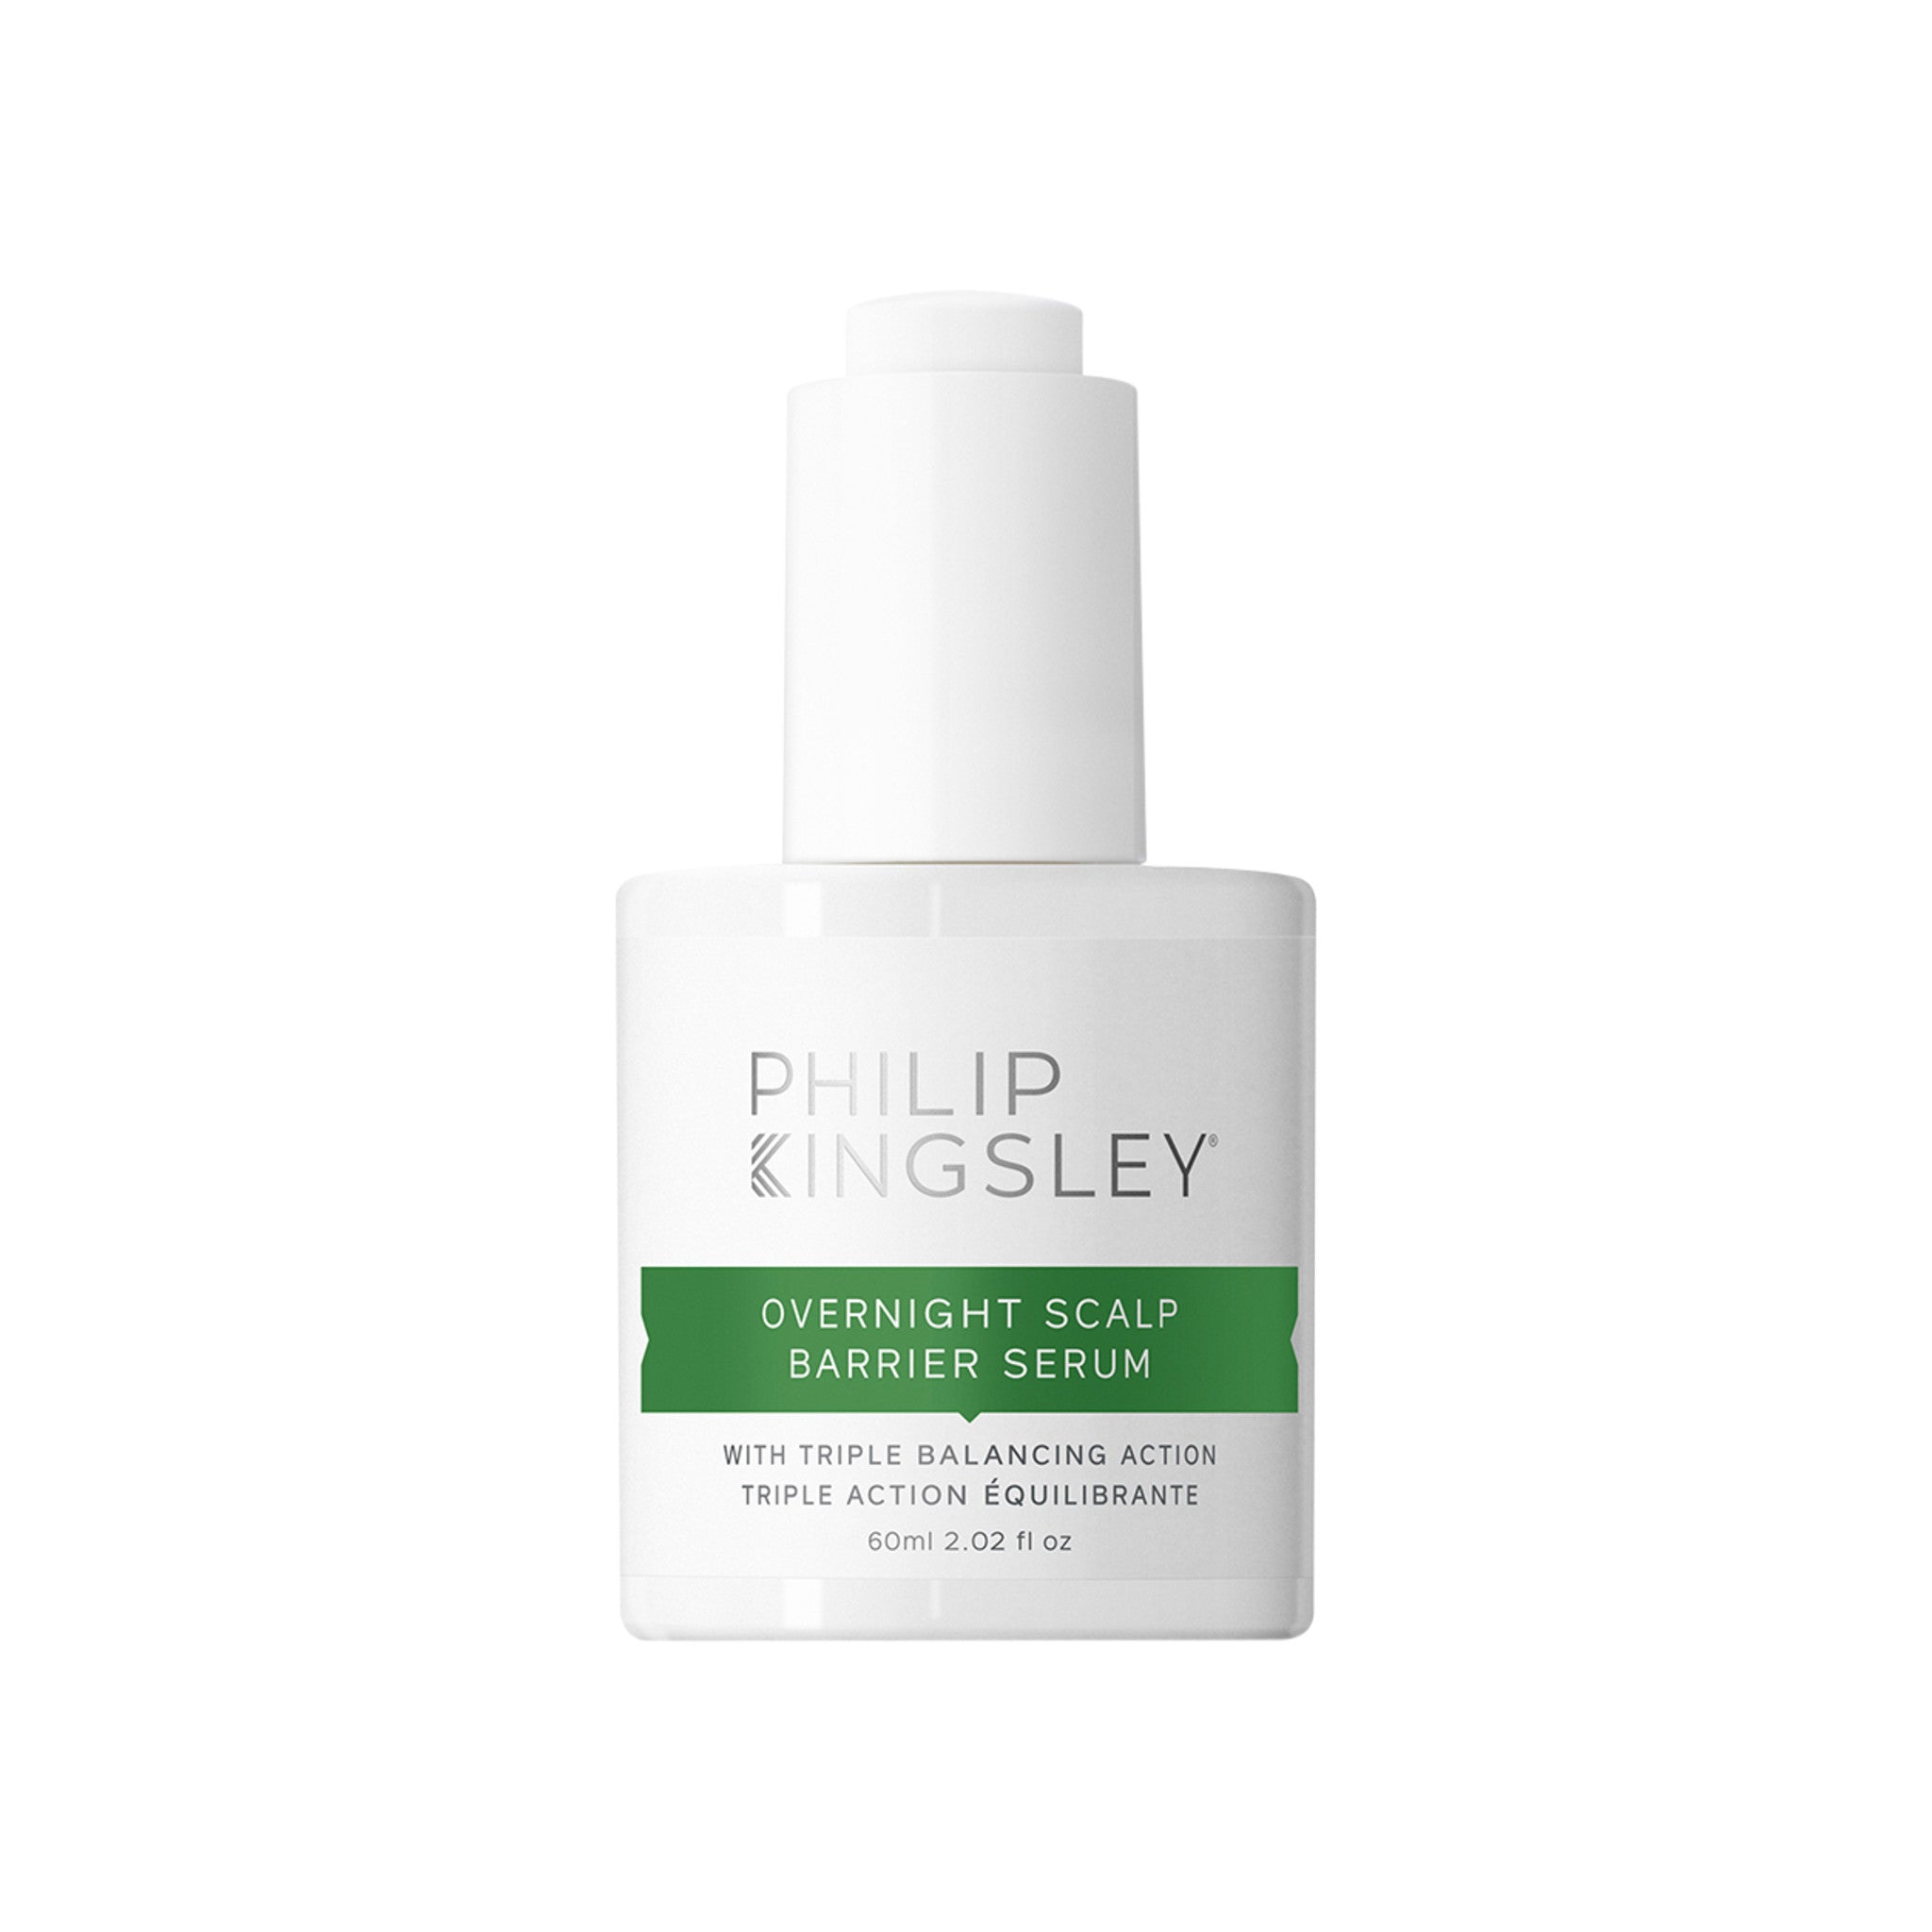 Philip Kingsley Overnight Scalp Barrier Serum with Triple Balancing Action main image.